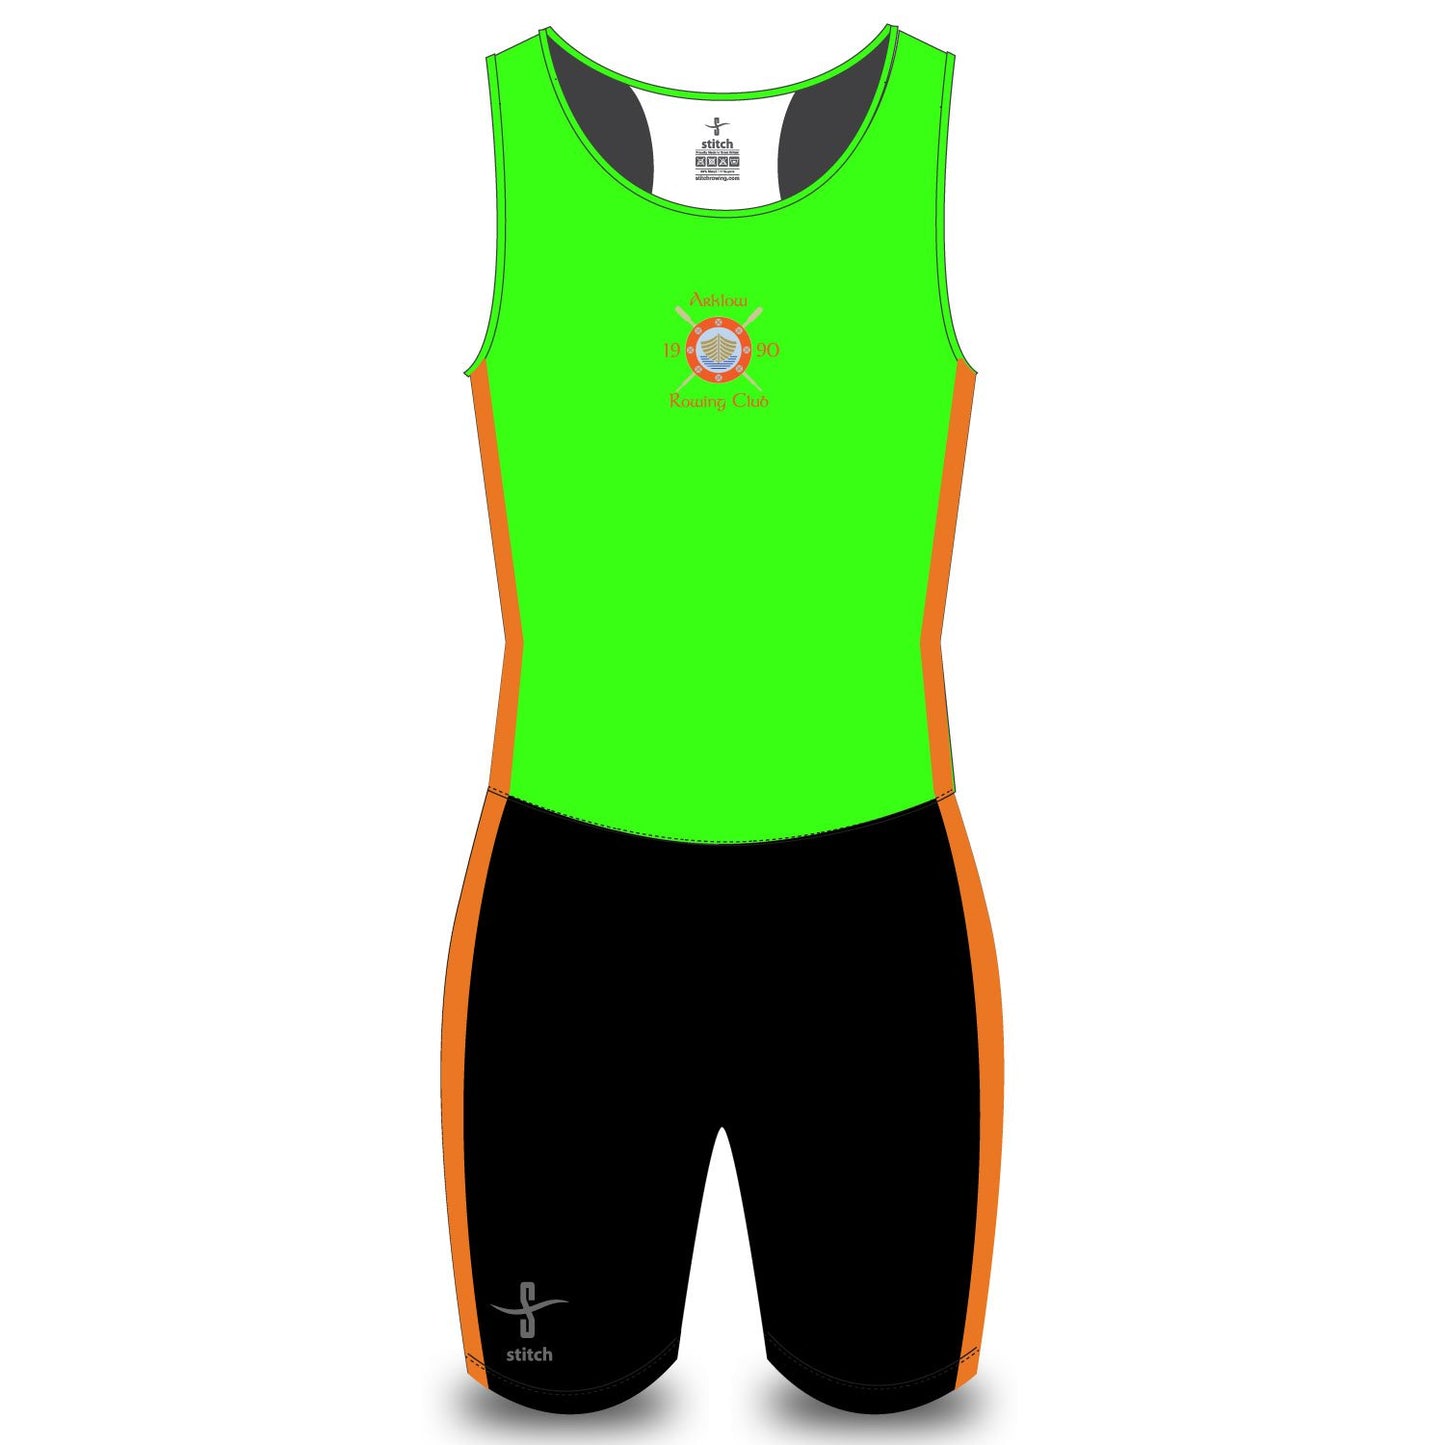 Arklow Rowing Club AIO Fluo Green